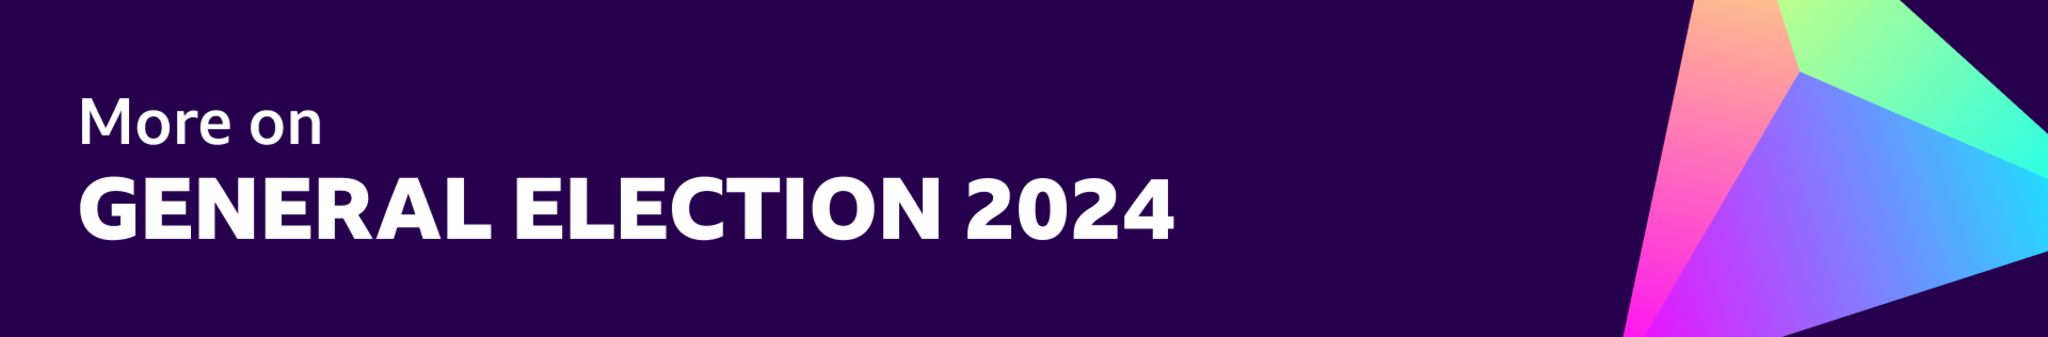 More on general election 2024 banner